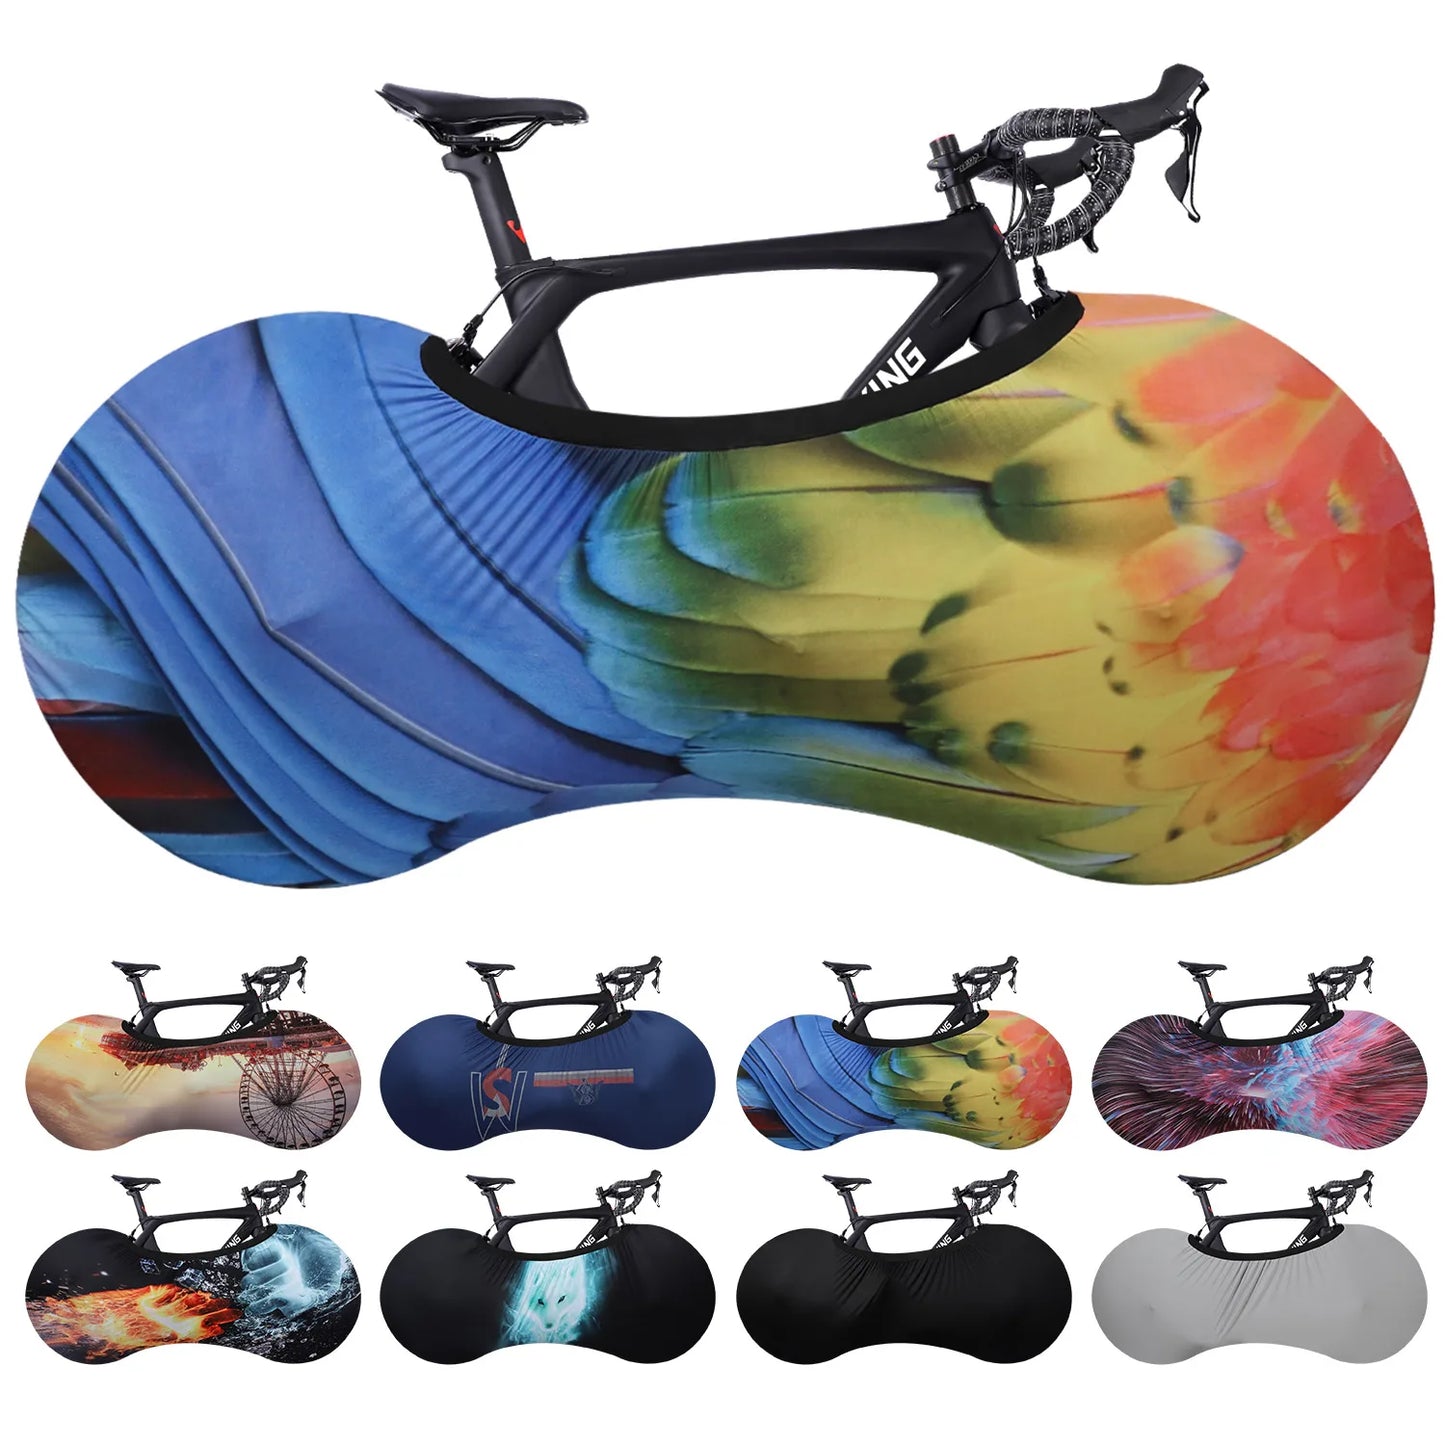 WEST BIKING Bicycle Cover multi colors for  MTB and Road Bike